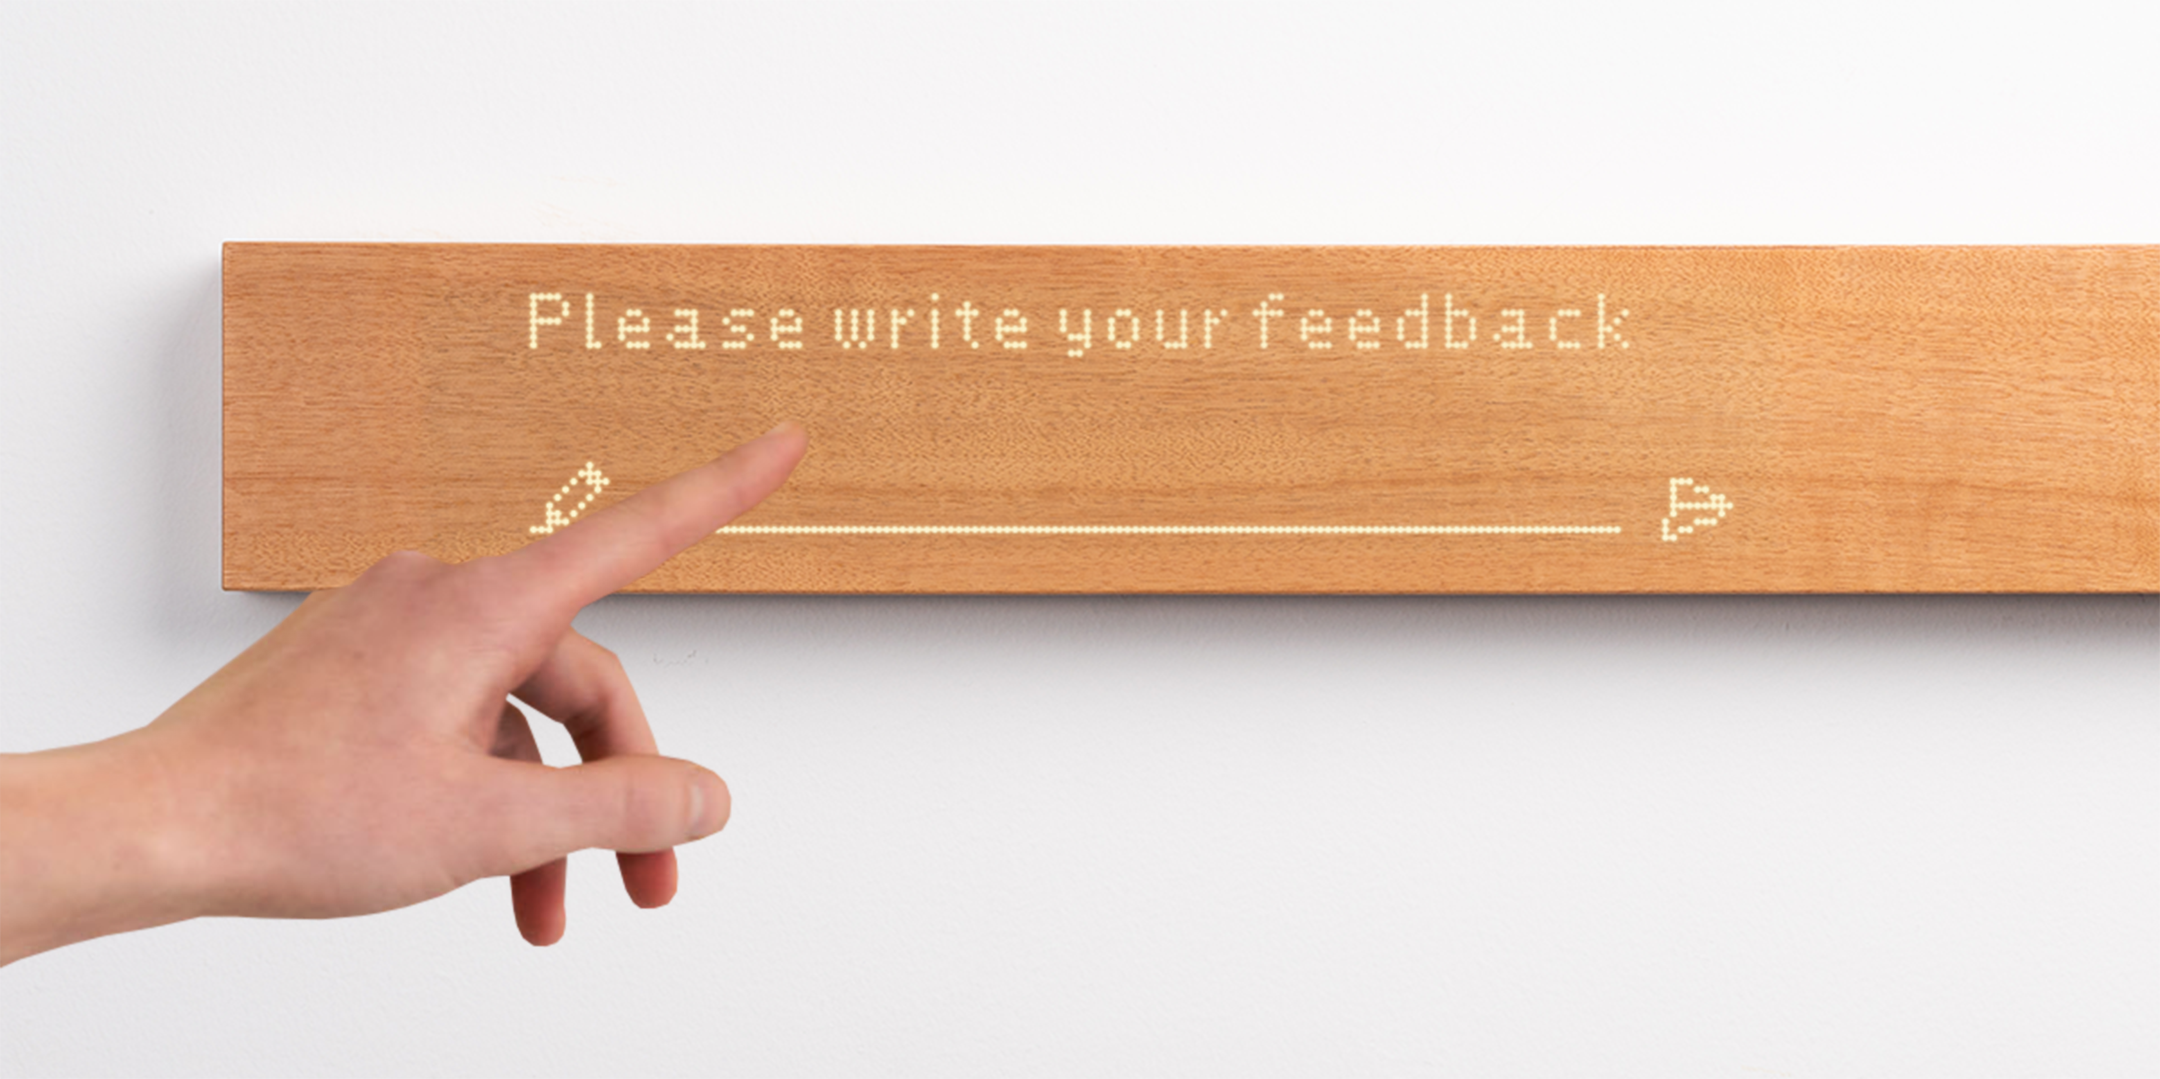 Customer feedback system that turns handwritten messages into data that SAP’s CRM system can read. (Jointly with SAP)